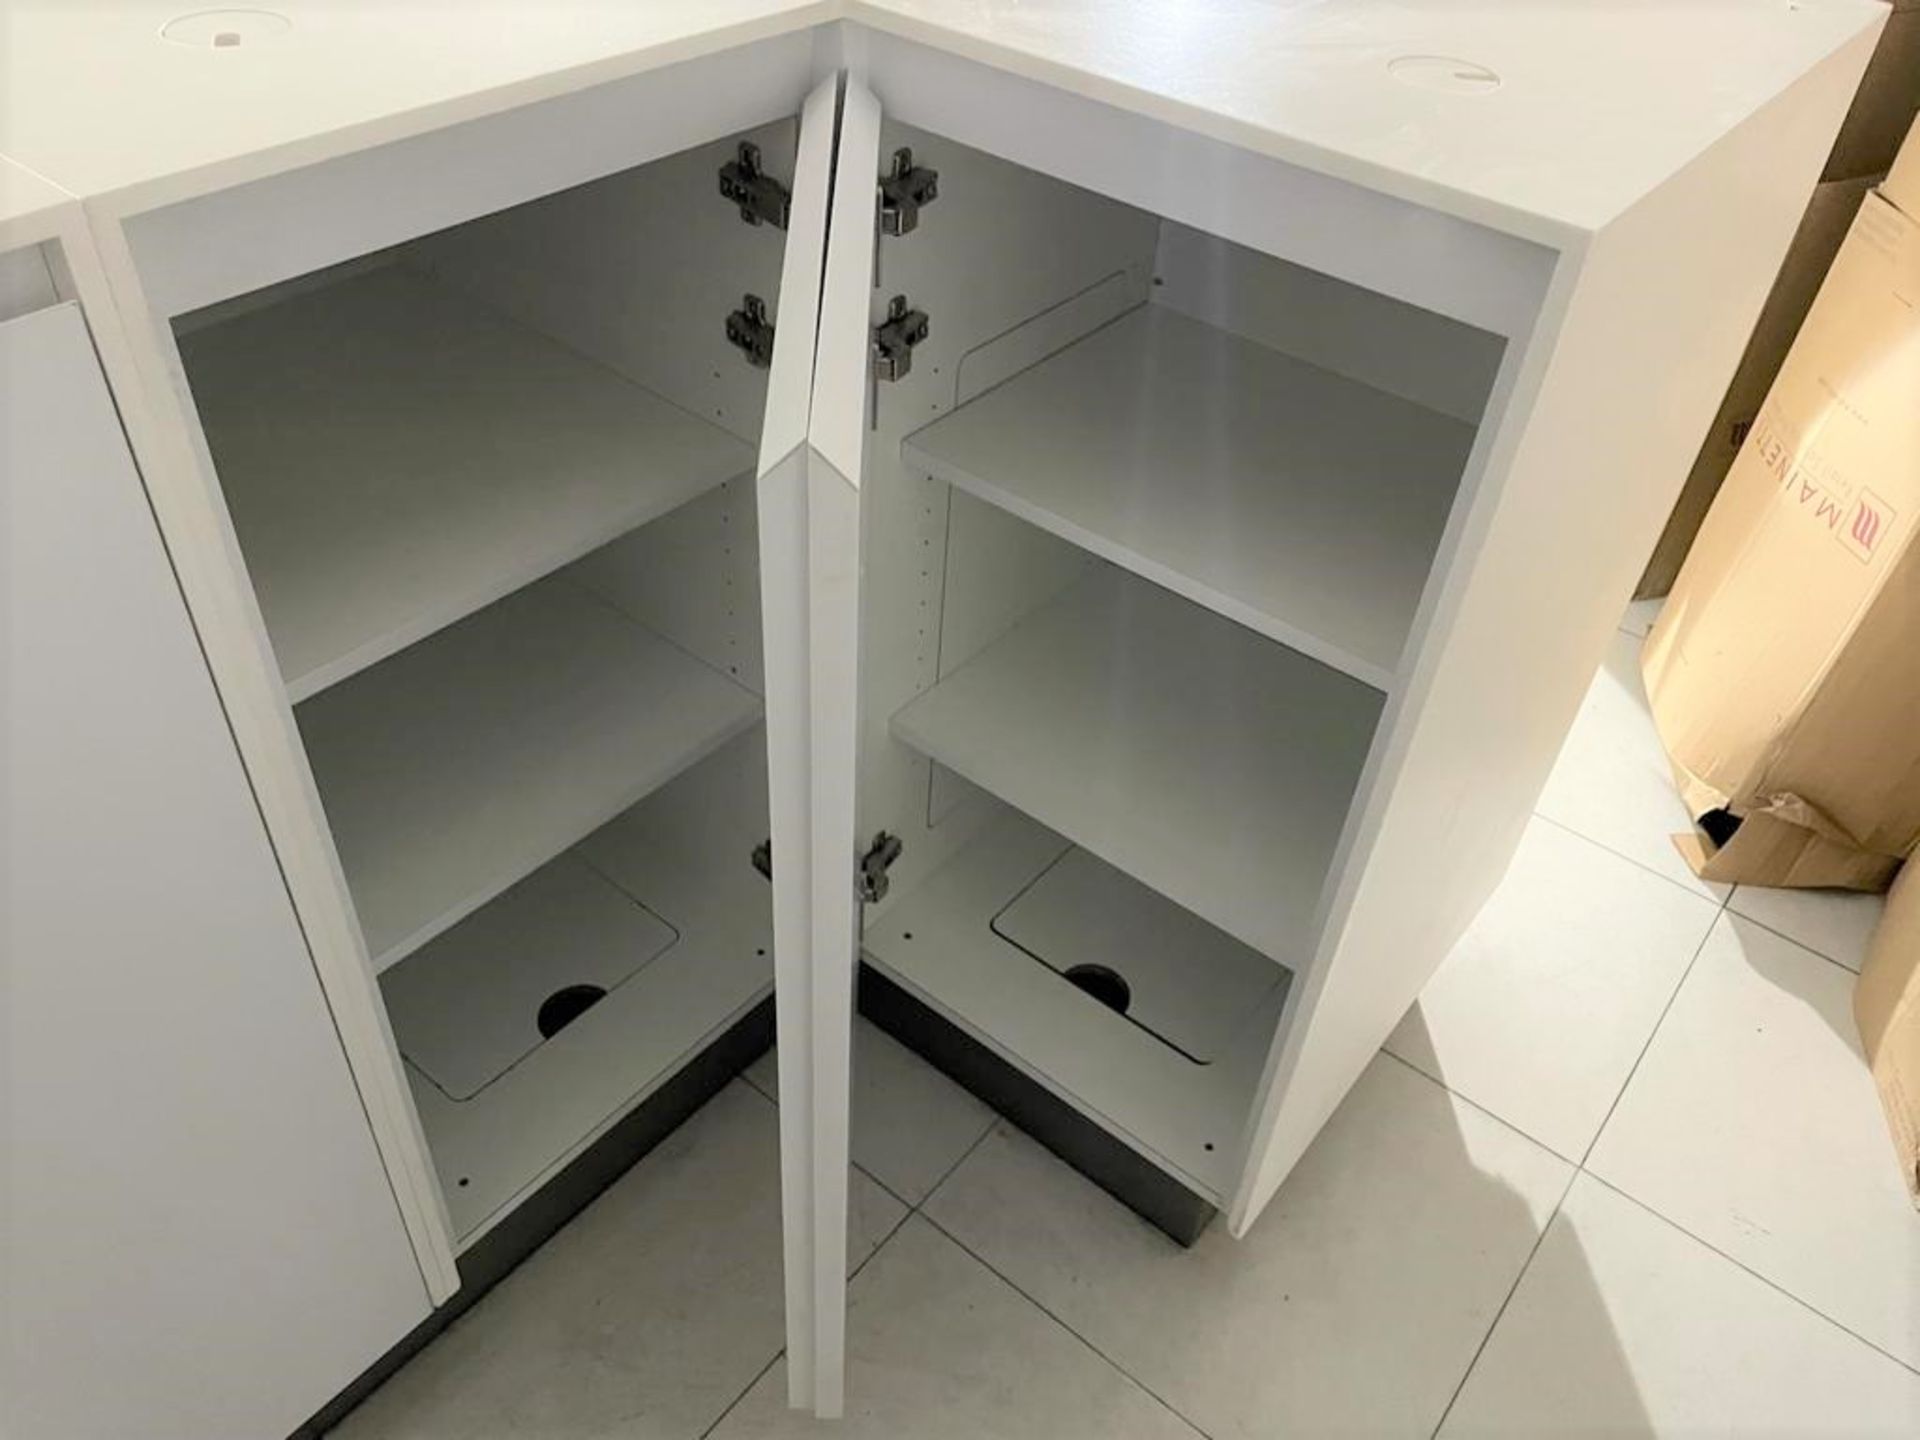 1 x L Shape Retail Counter in White With Advertising Light Boxes and Storage Cabinets With Cable - Image 15 of 19